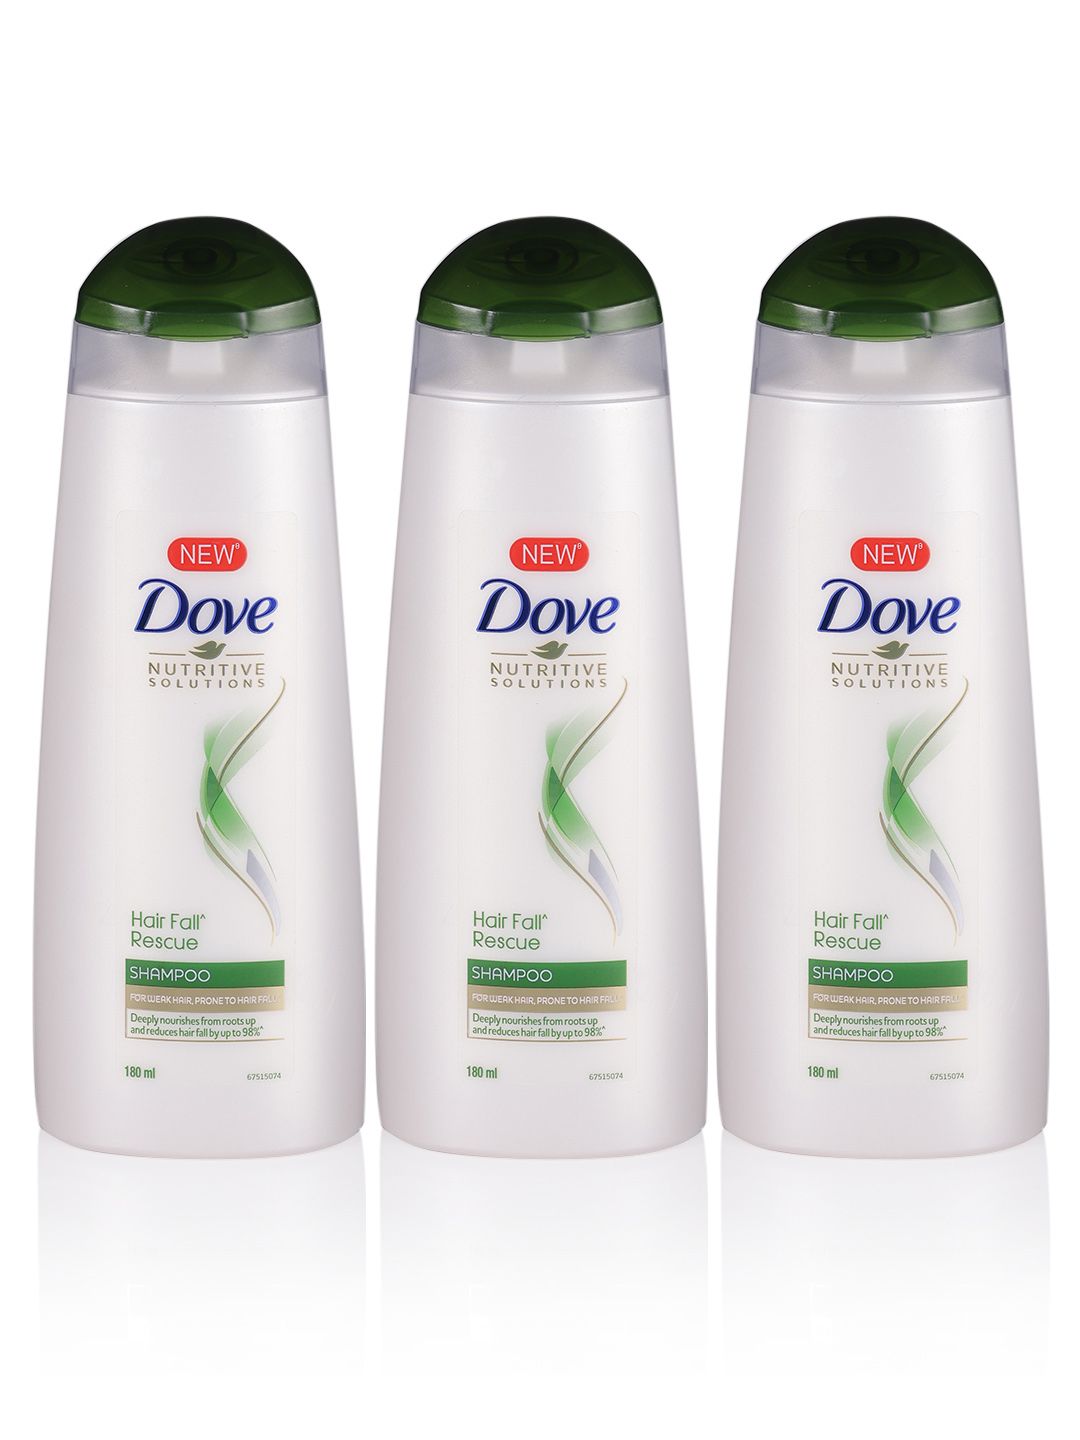 Dove Set of 3 Hair Fall Rescue Shampoos - 180 ml each Price in India